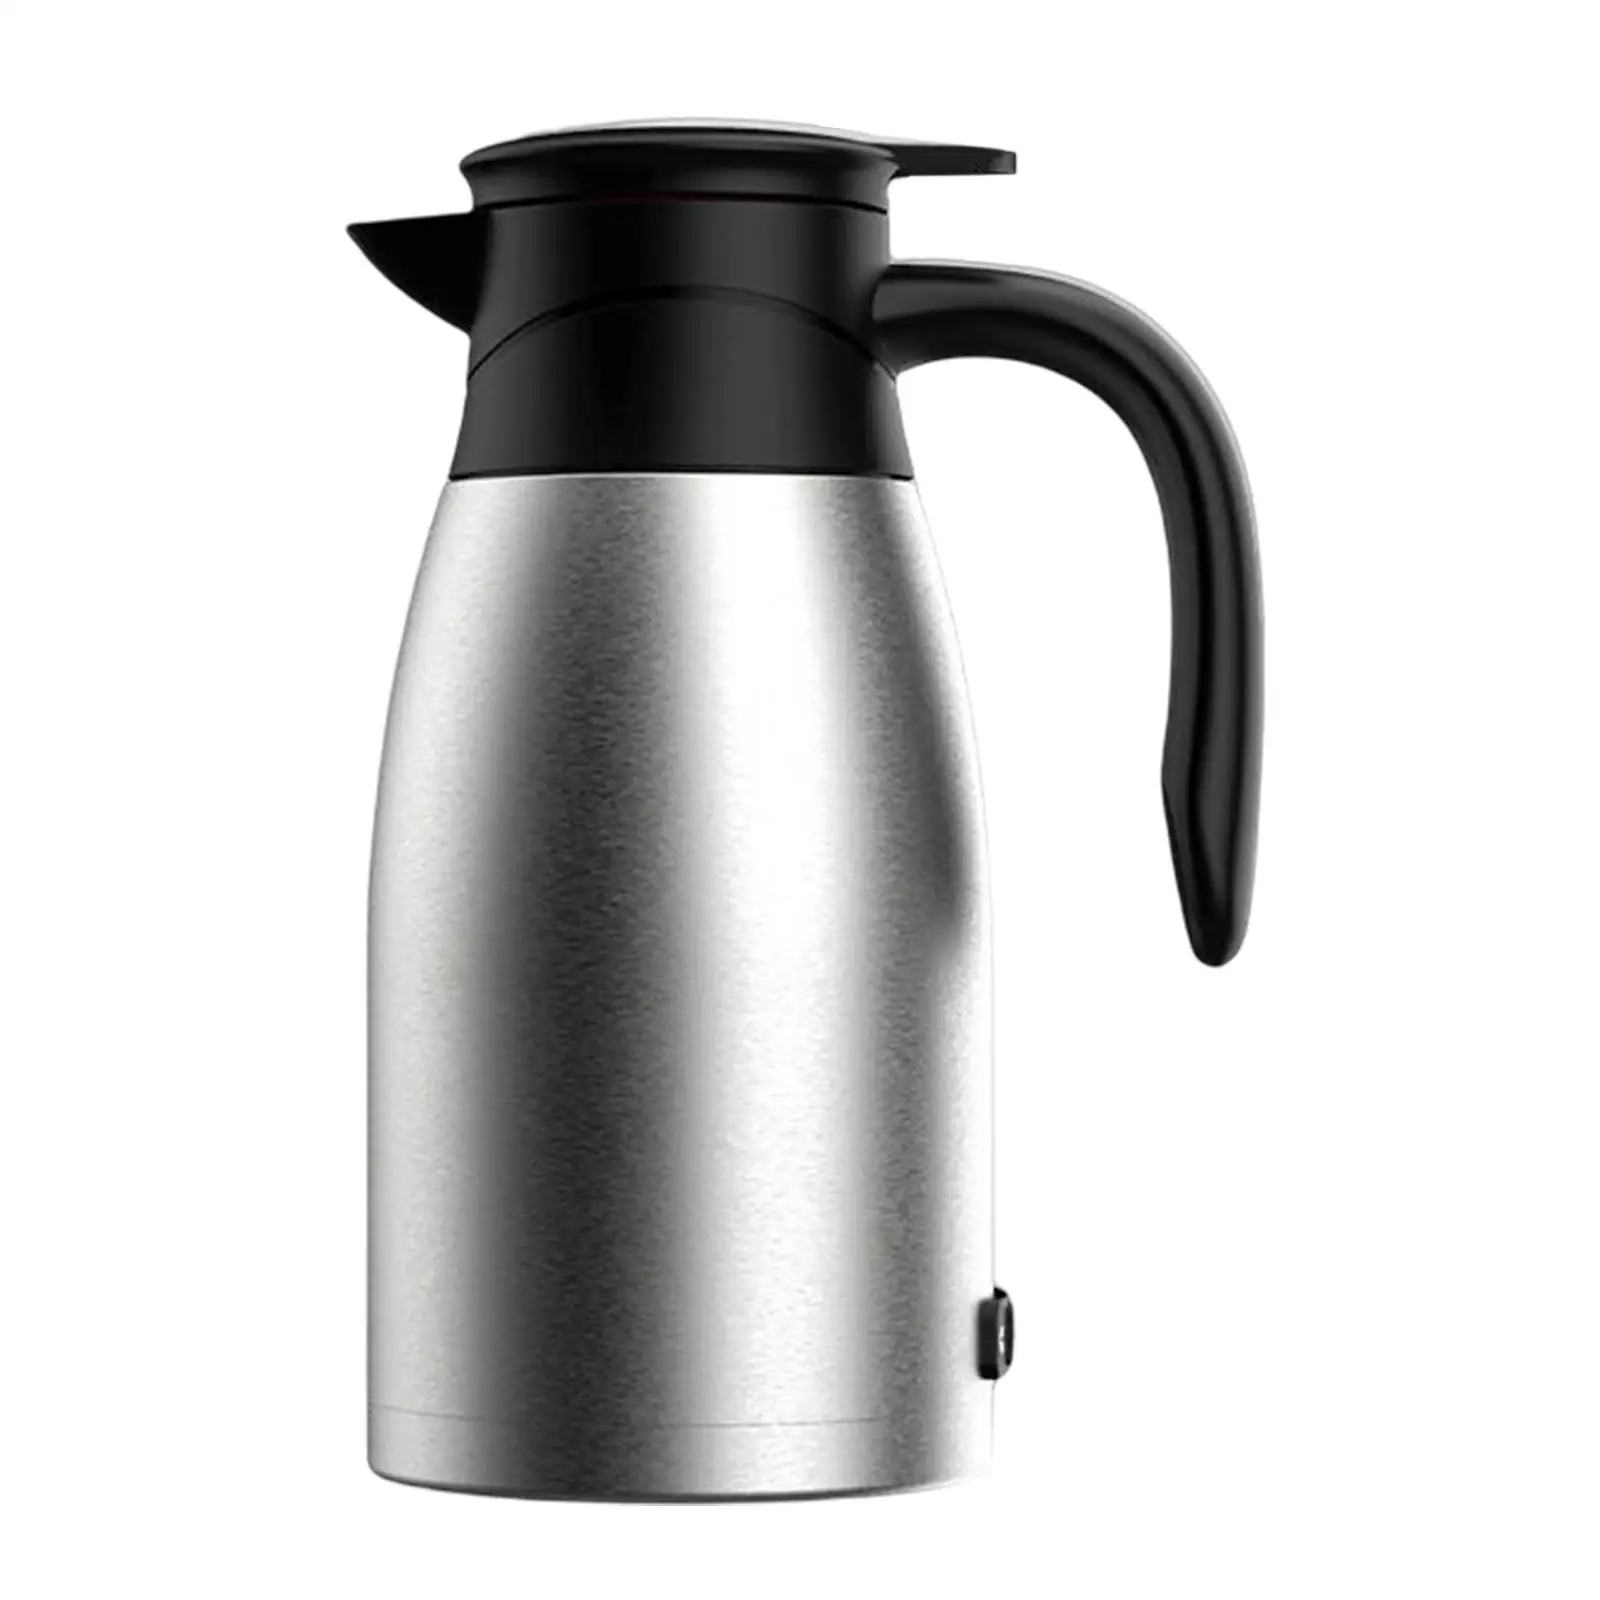 12V Car Kettle Boiler Stainless Steel Heating Cup for Camping Outdoor